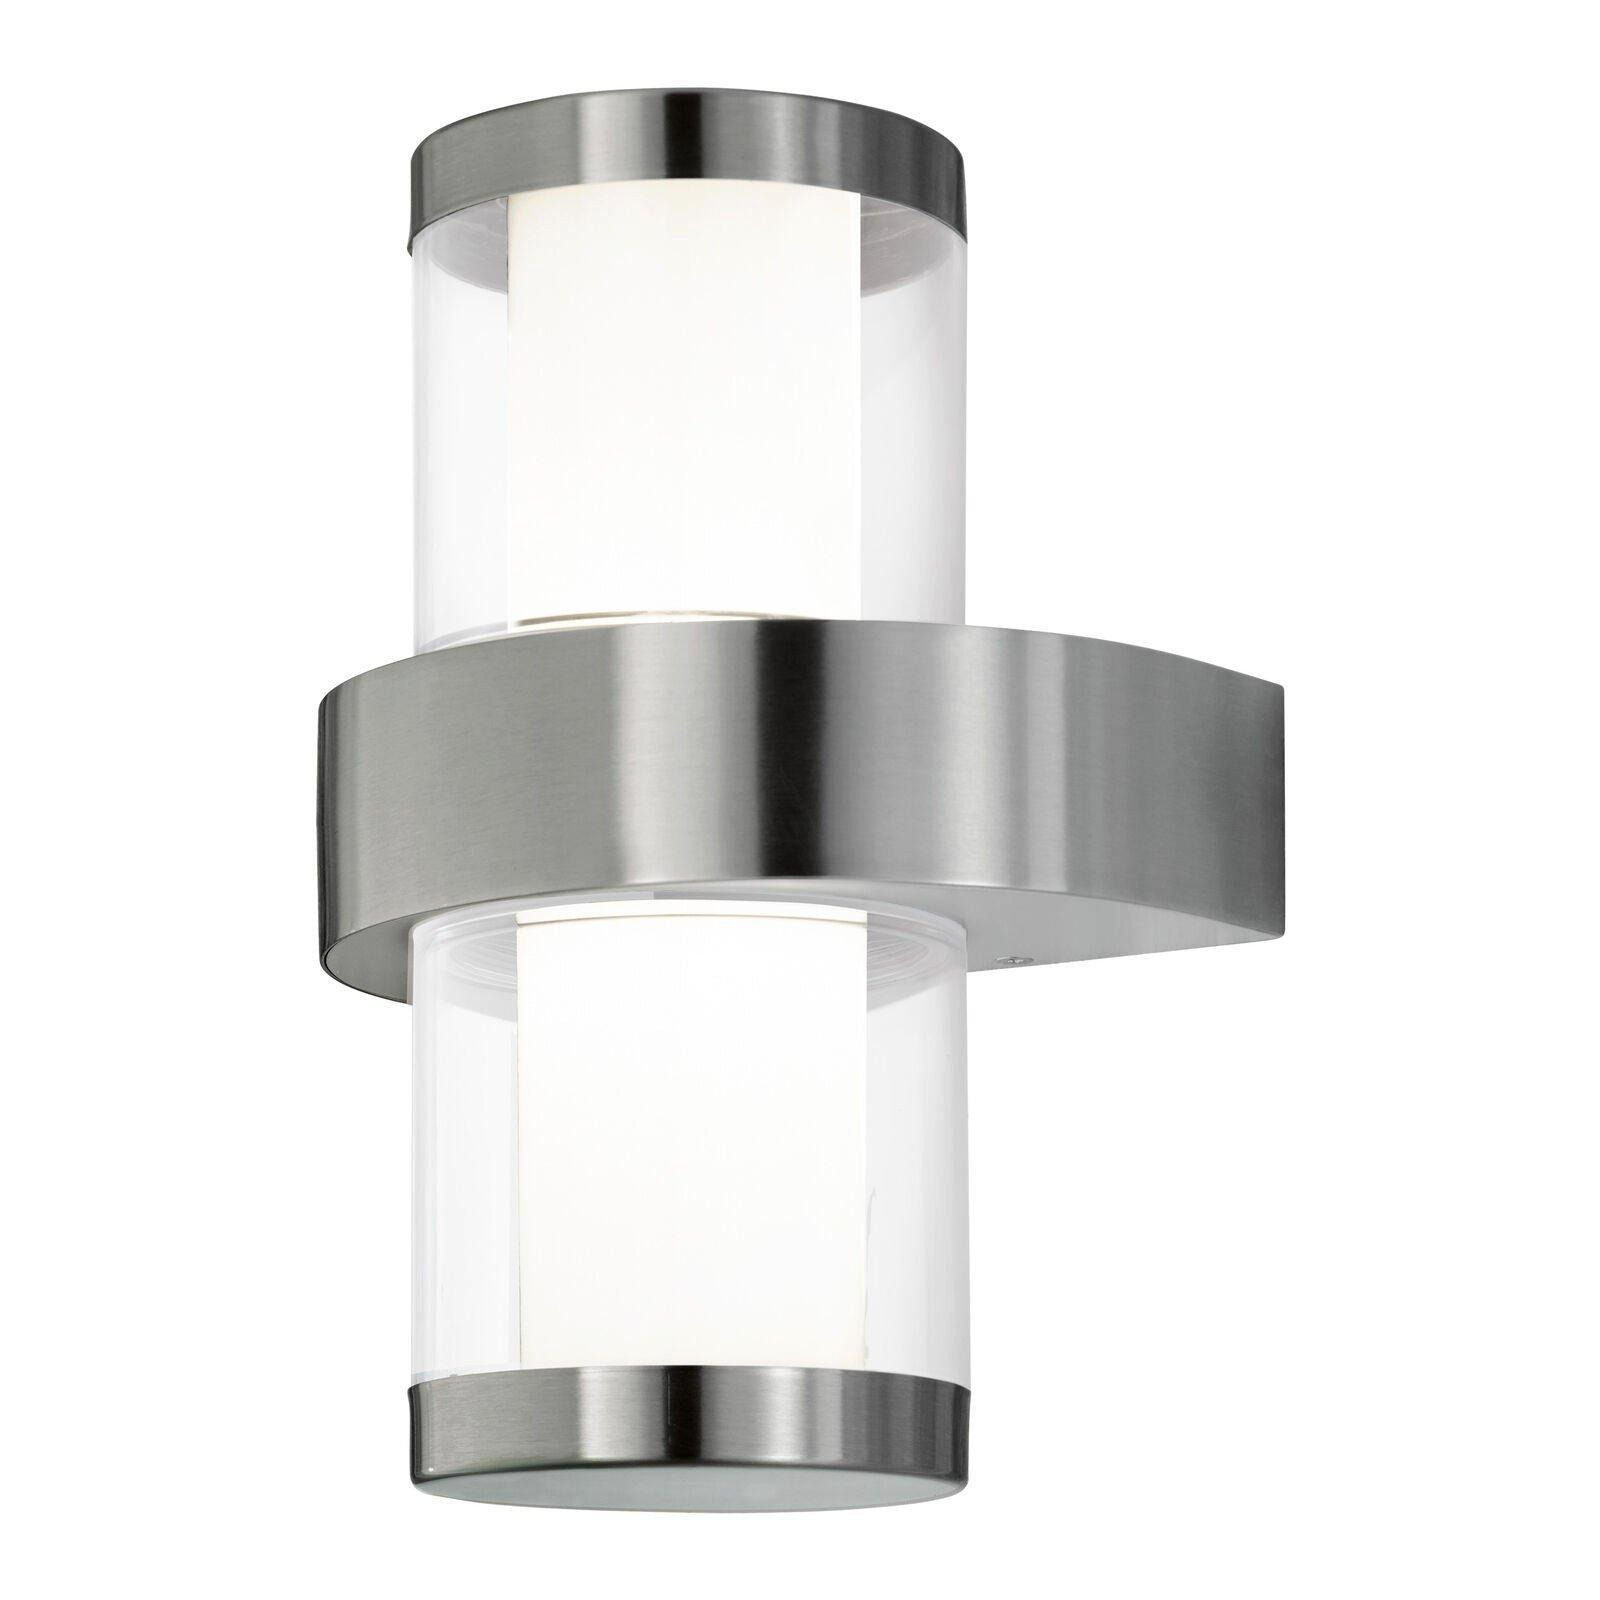 IP44 Outdoor Wall Light Stainless Steel & Glass 3.7W Built in LED Porch Lamp - image 1